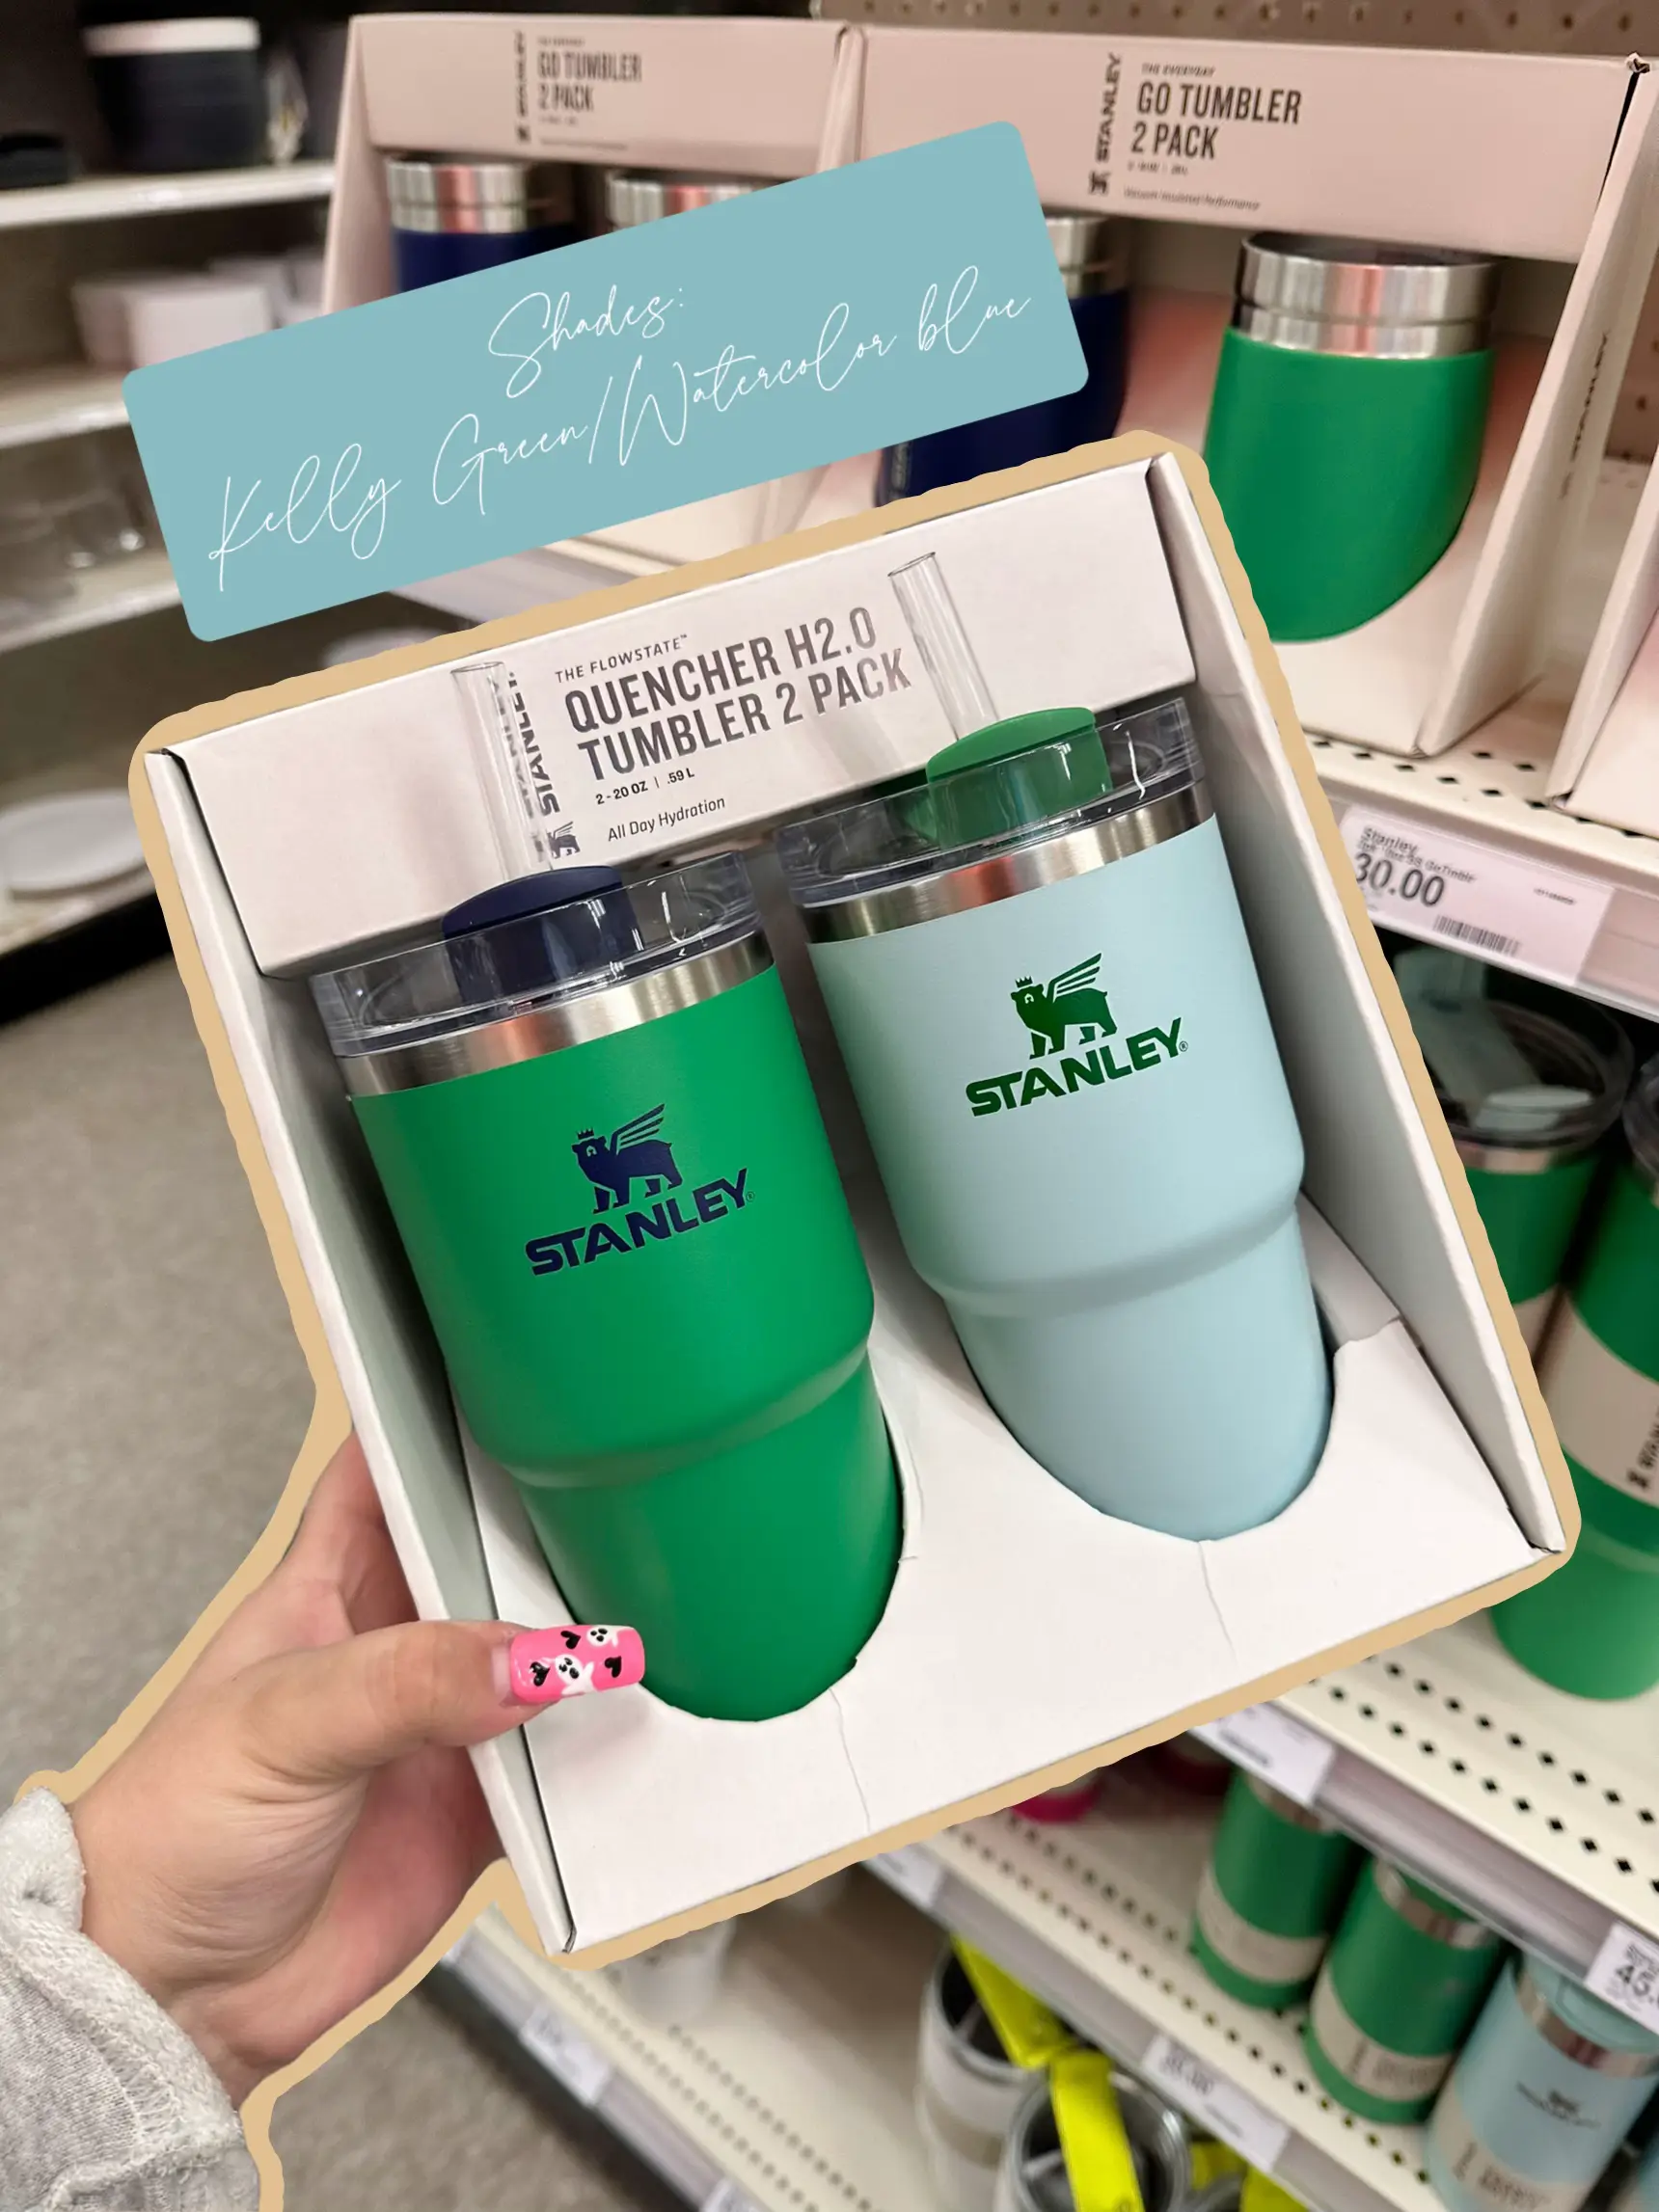 Target's Magnolia brand dropped new Stanley colors and more